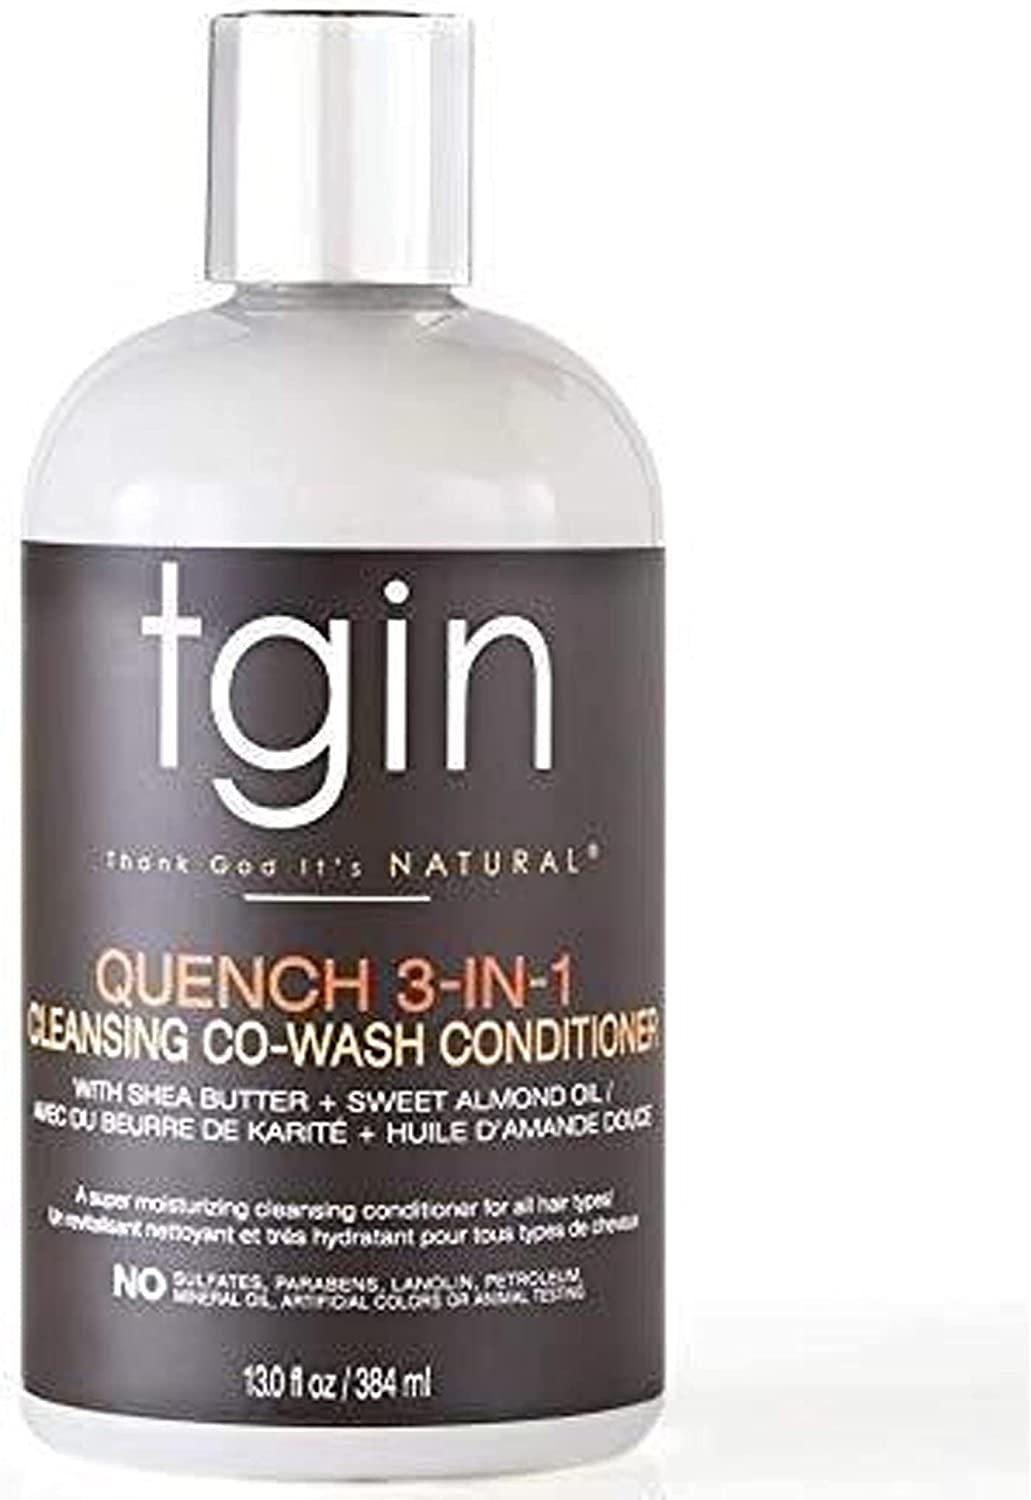 TGIN Quench 3-in-1 Co-Wash Conditioner and Detangler 384ml